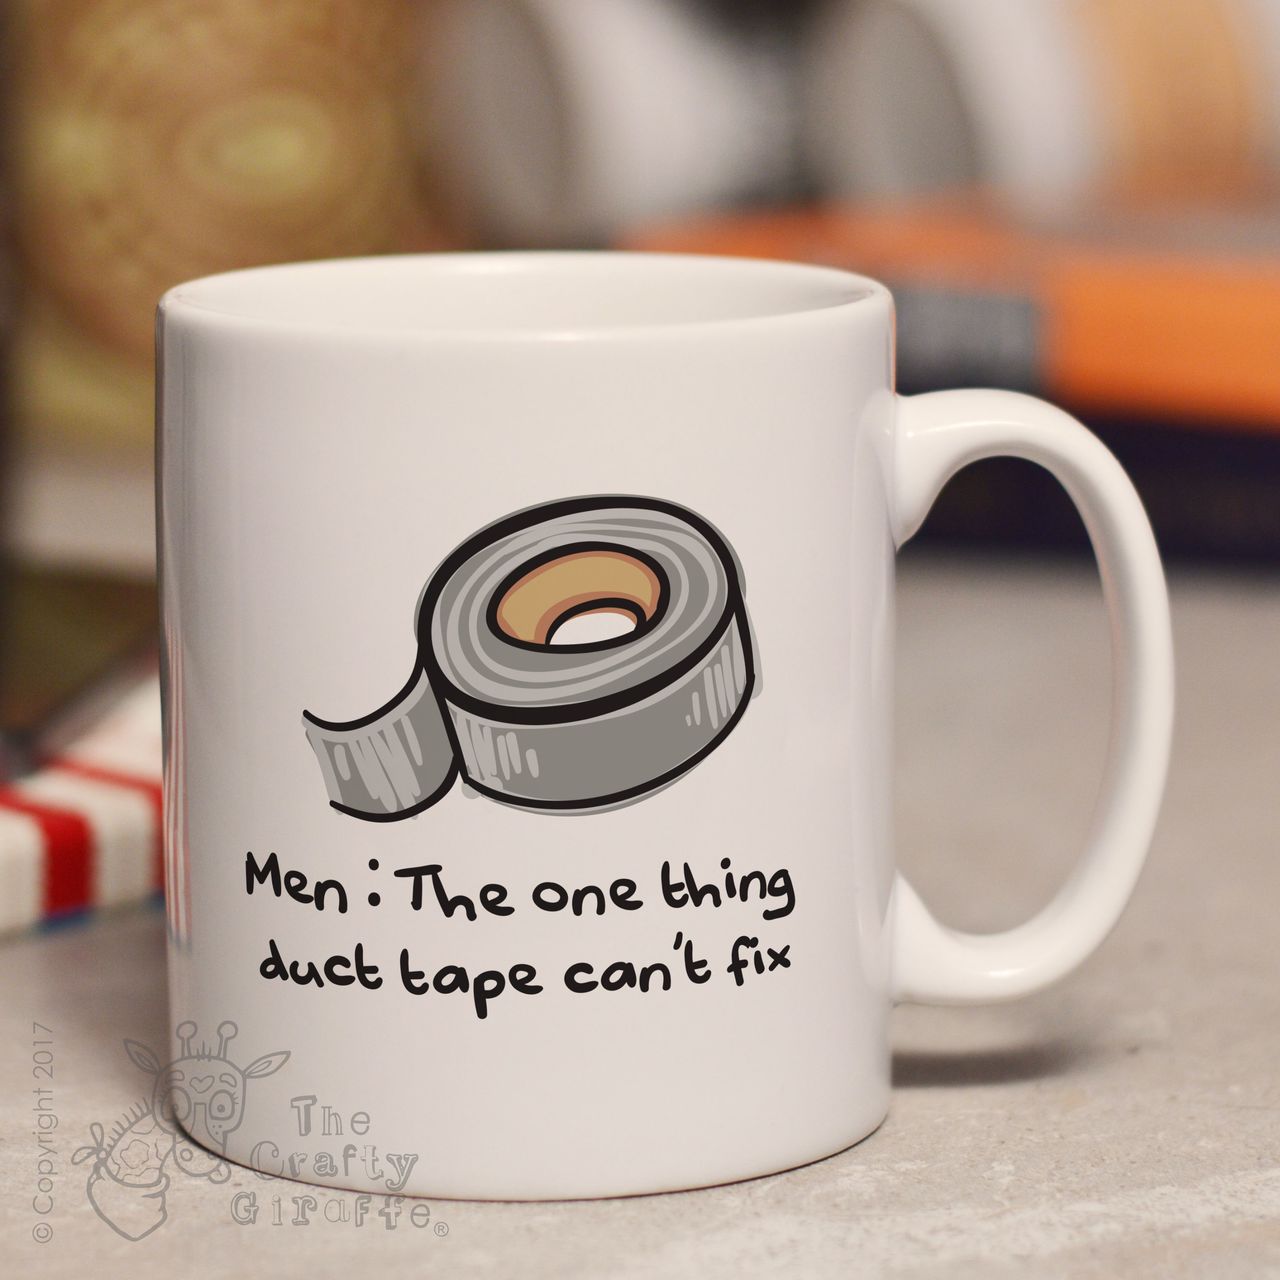 Men – The one thing duct tape can’t fix mug